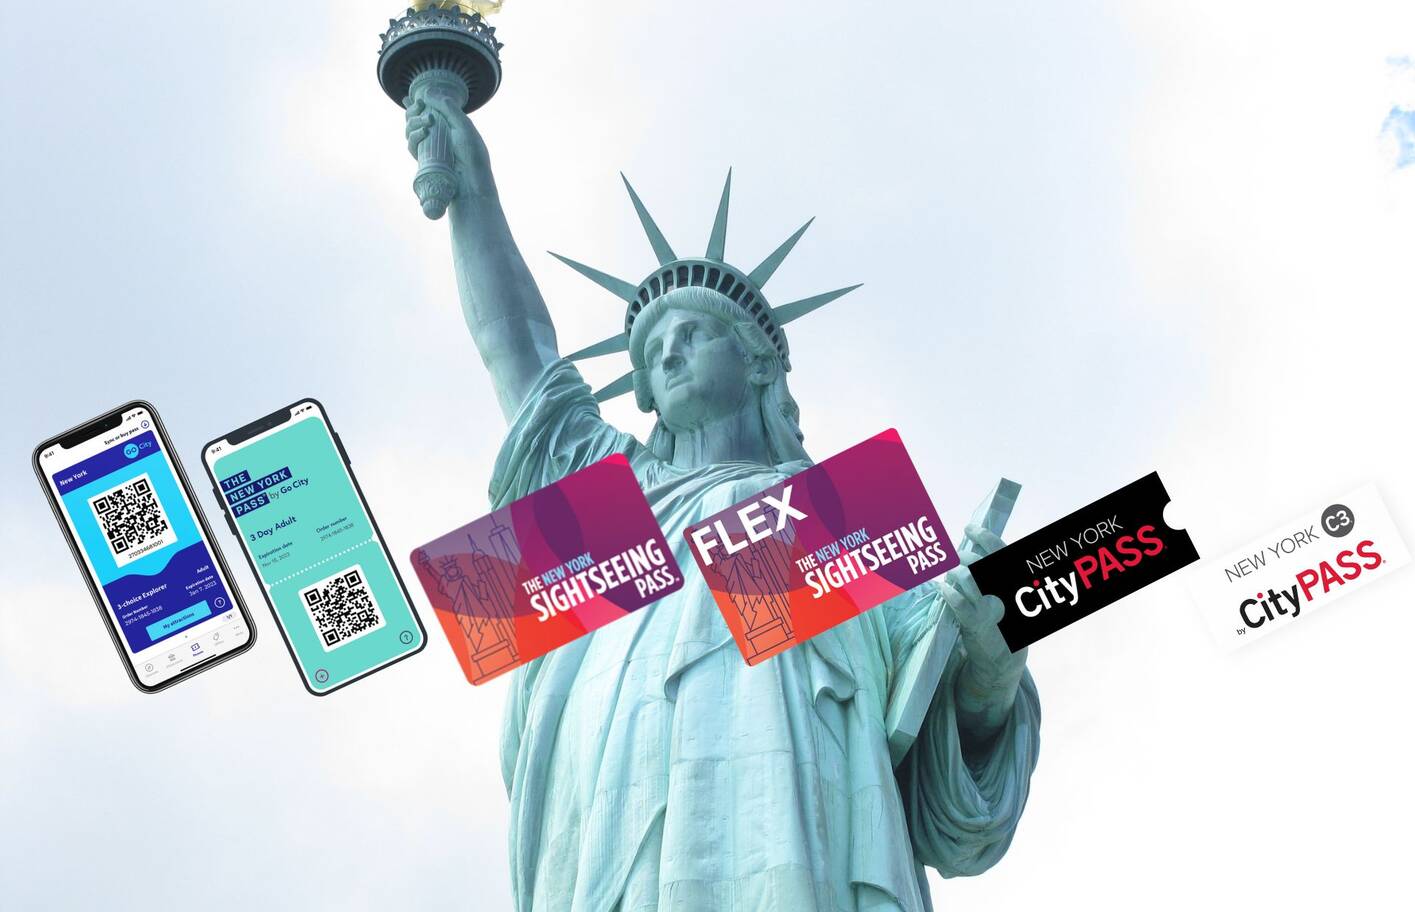 Statue of Liberty, NYC sightseeing passes which is best